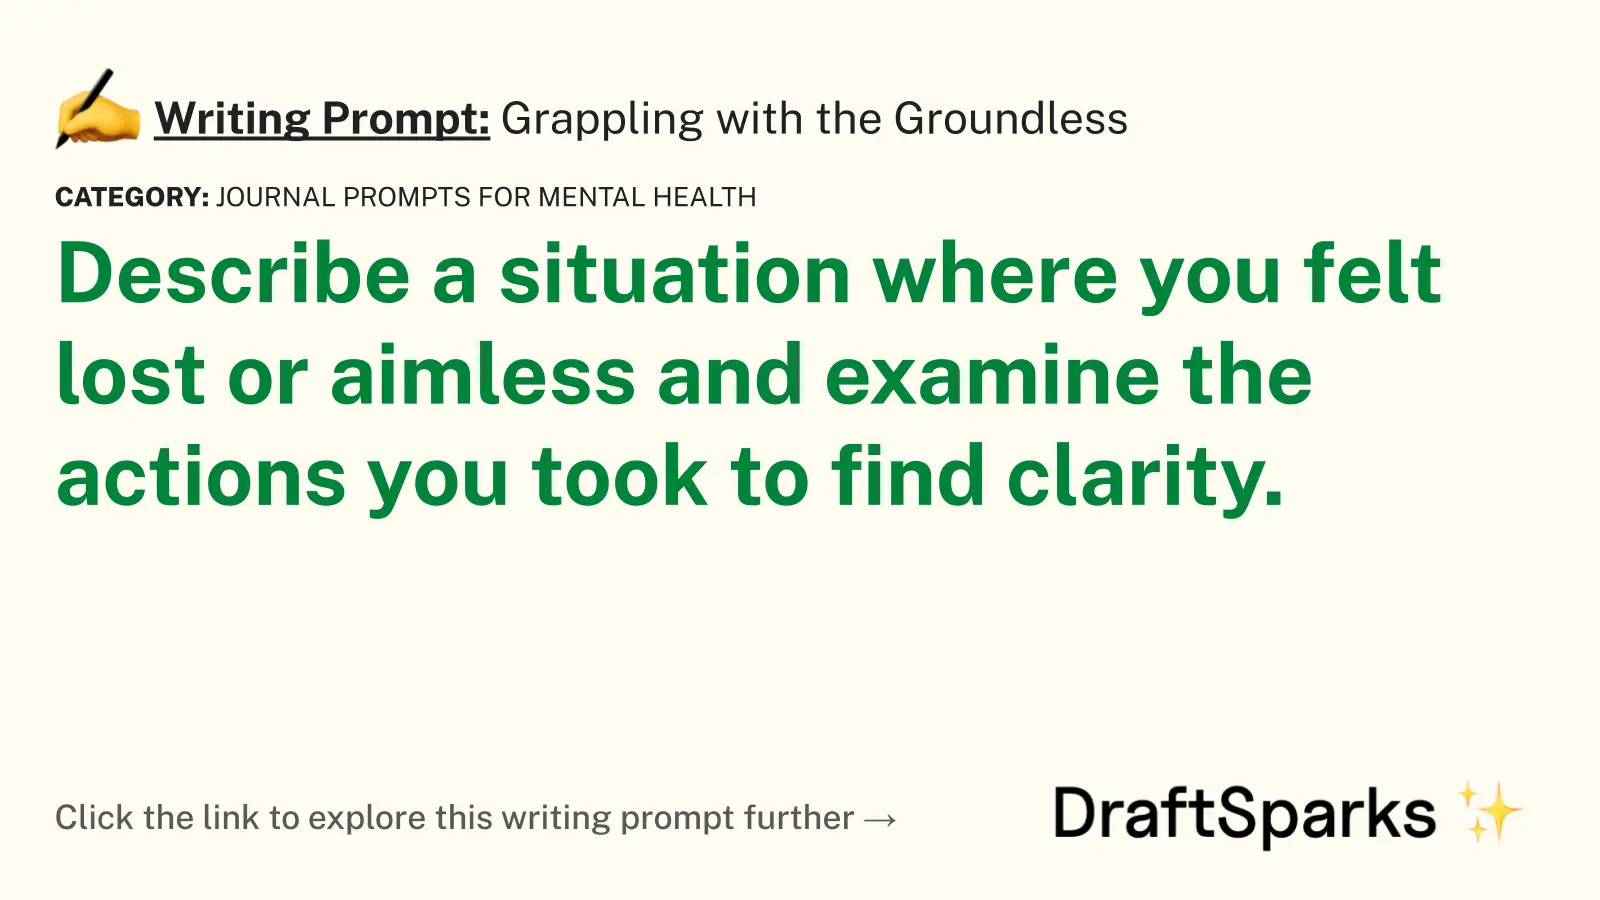 Grappling with the Groundless